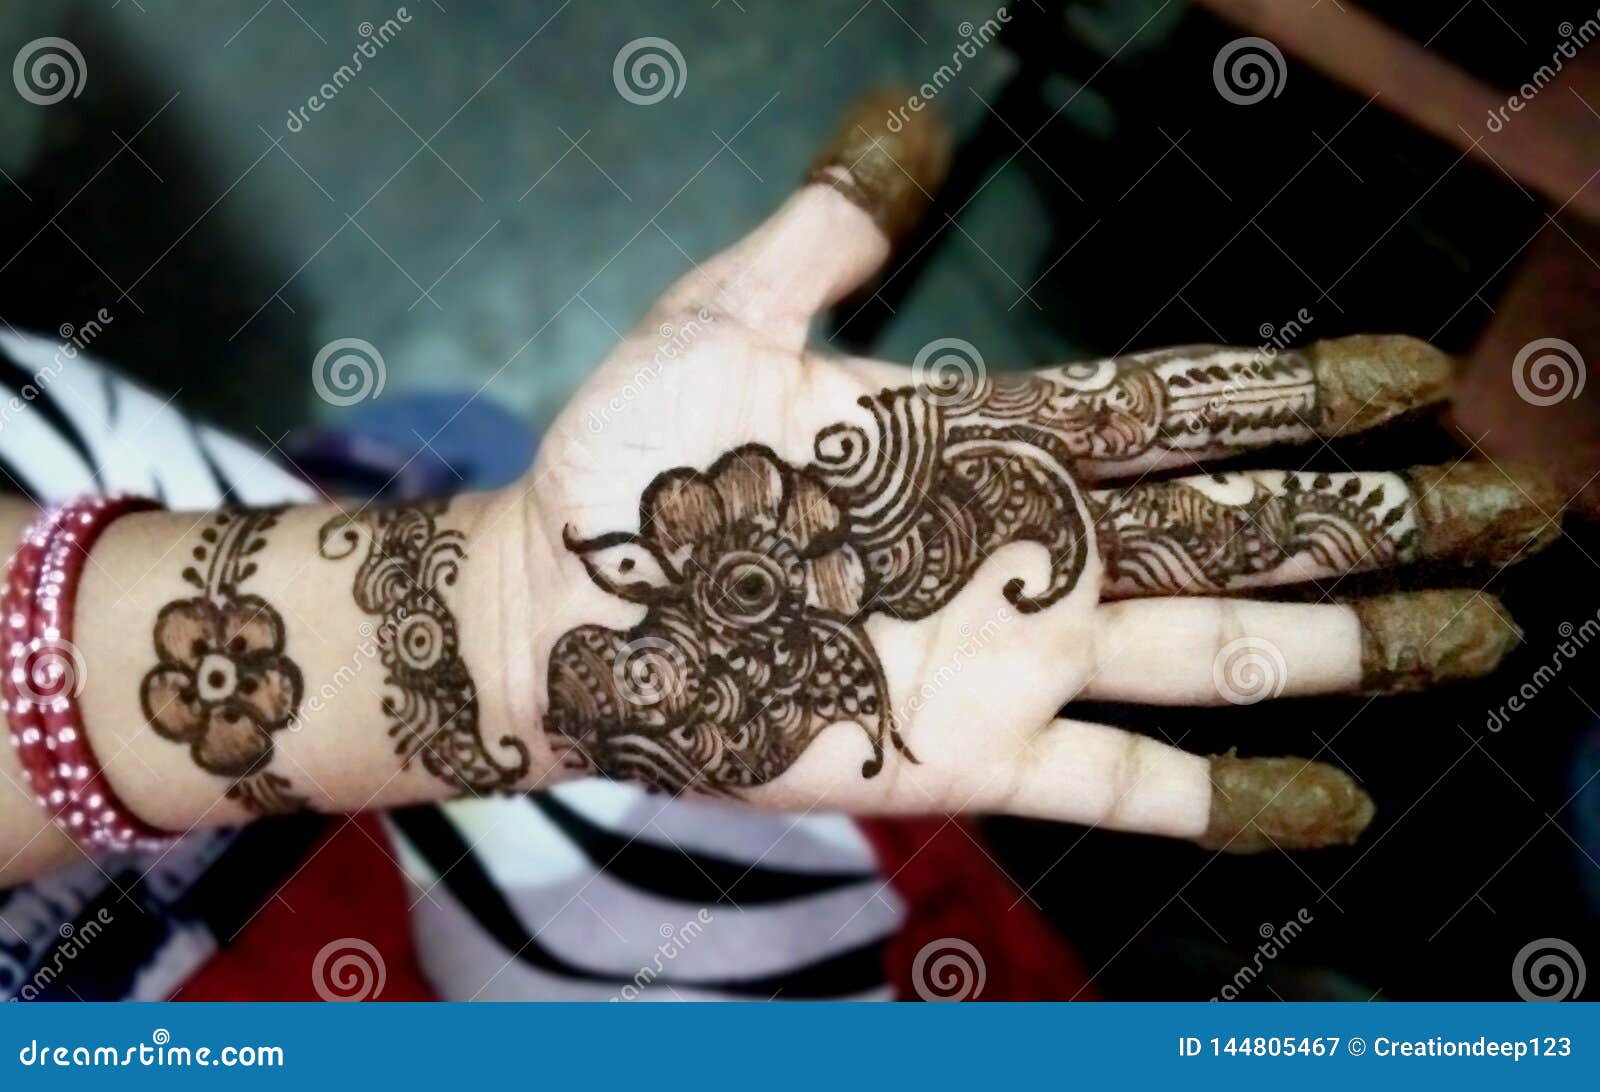 Popular Mehndi Designs for Hands Indian Traditions Stock Image - Image ...